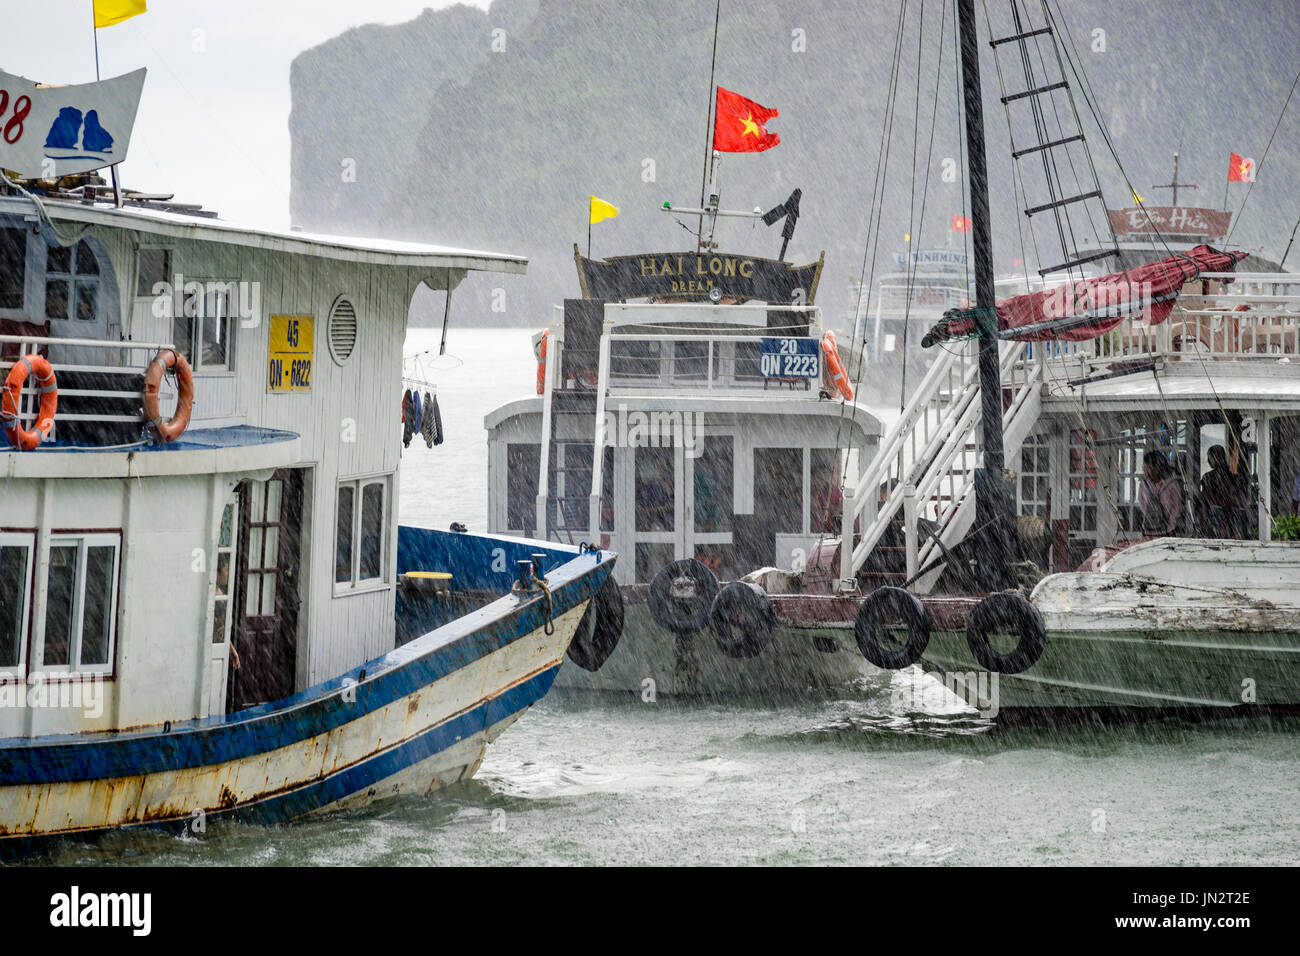 Junk boats taking tourists out to see Ha Long Bay despite heavy rain Stock Photo